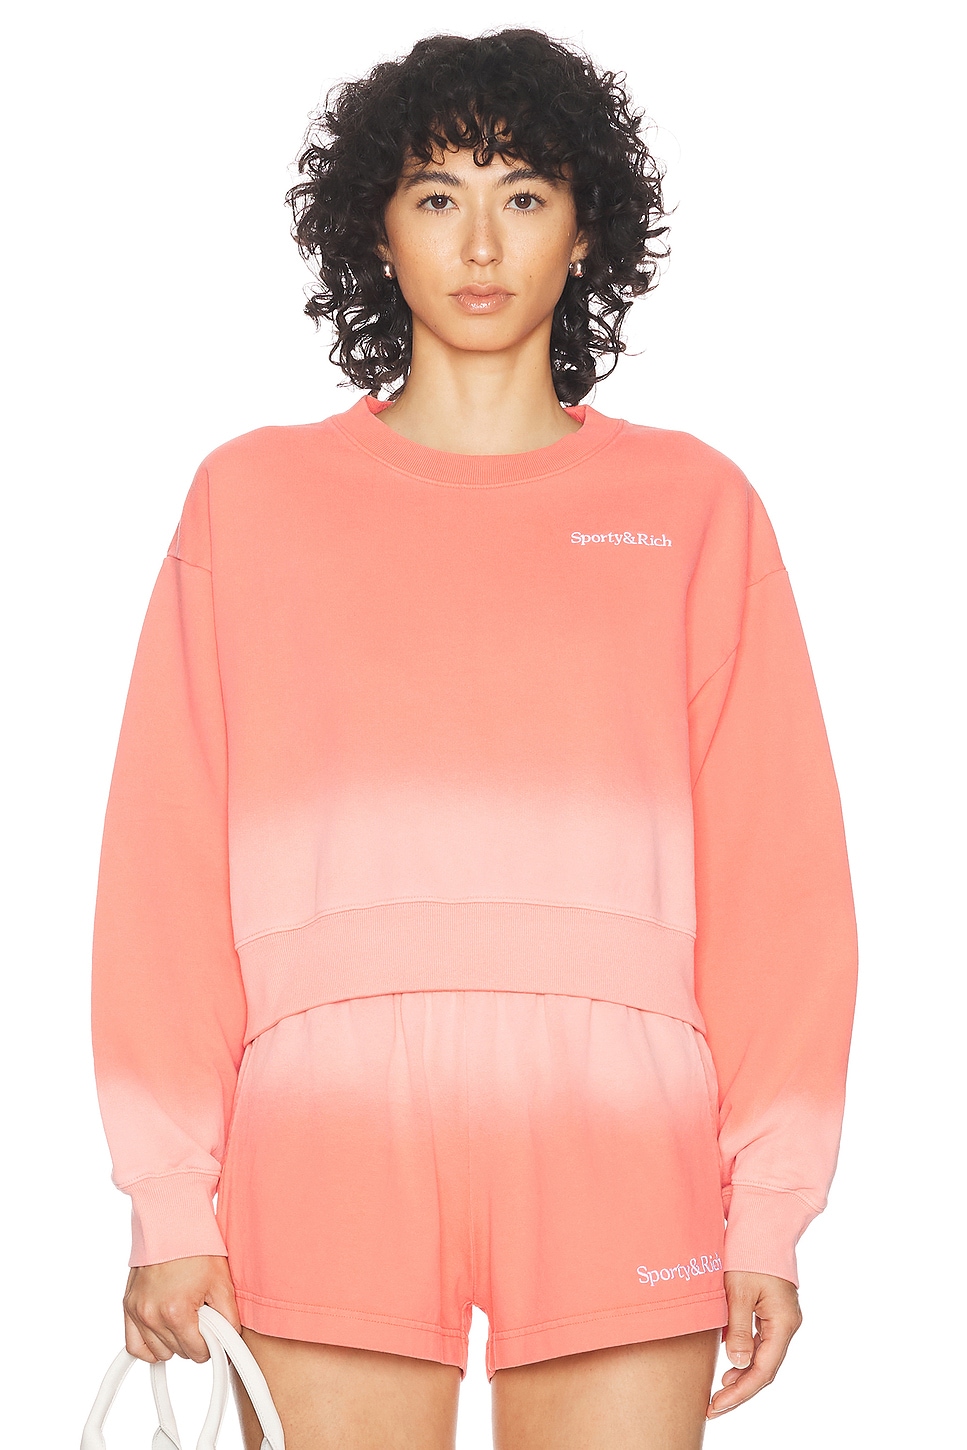 Image 1 of Sporty & Rich Serif Logo Embroidered Cropped Crewneck Sweatshirt in Dip Dye Pink & White